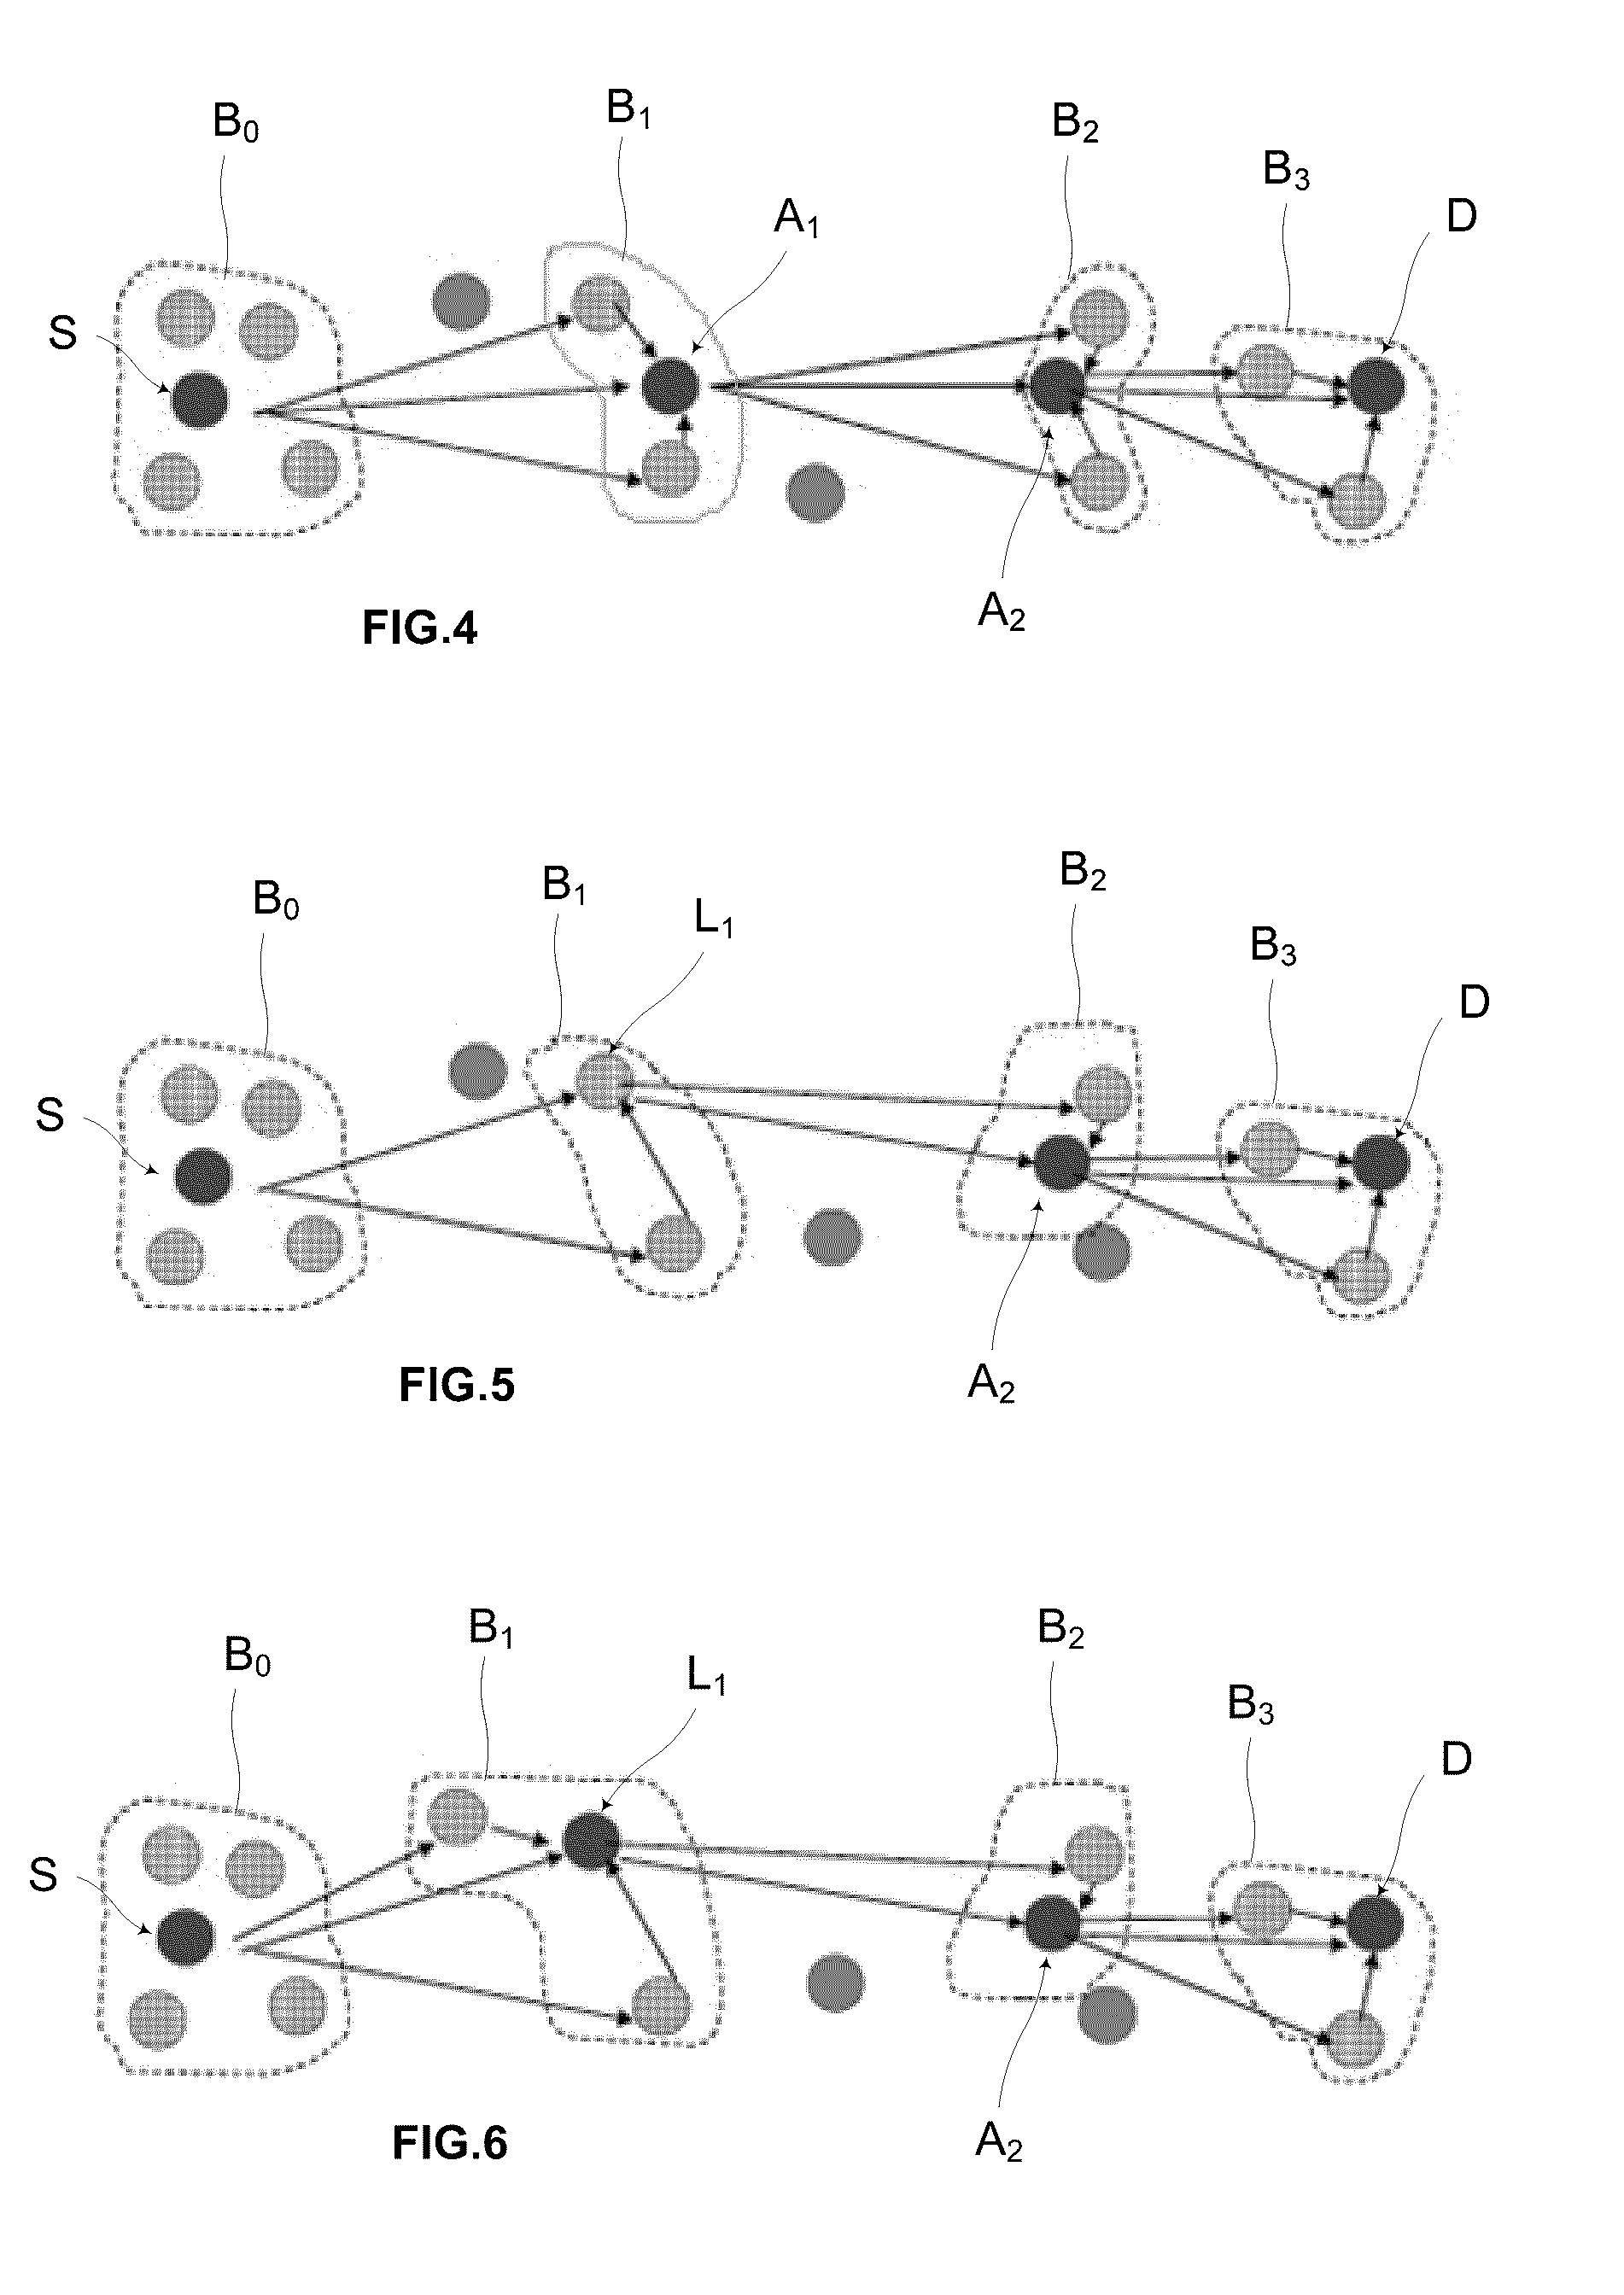 System and method for routing a data packet in a wireless network, computing system in a system for routing a data packet in a wireless network, and method for routing a data packet in a computing system